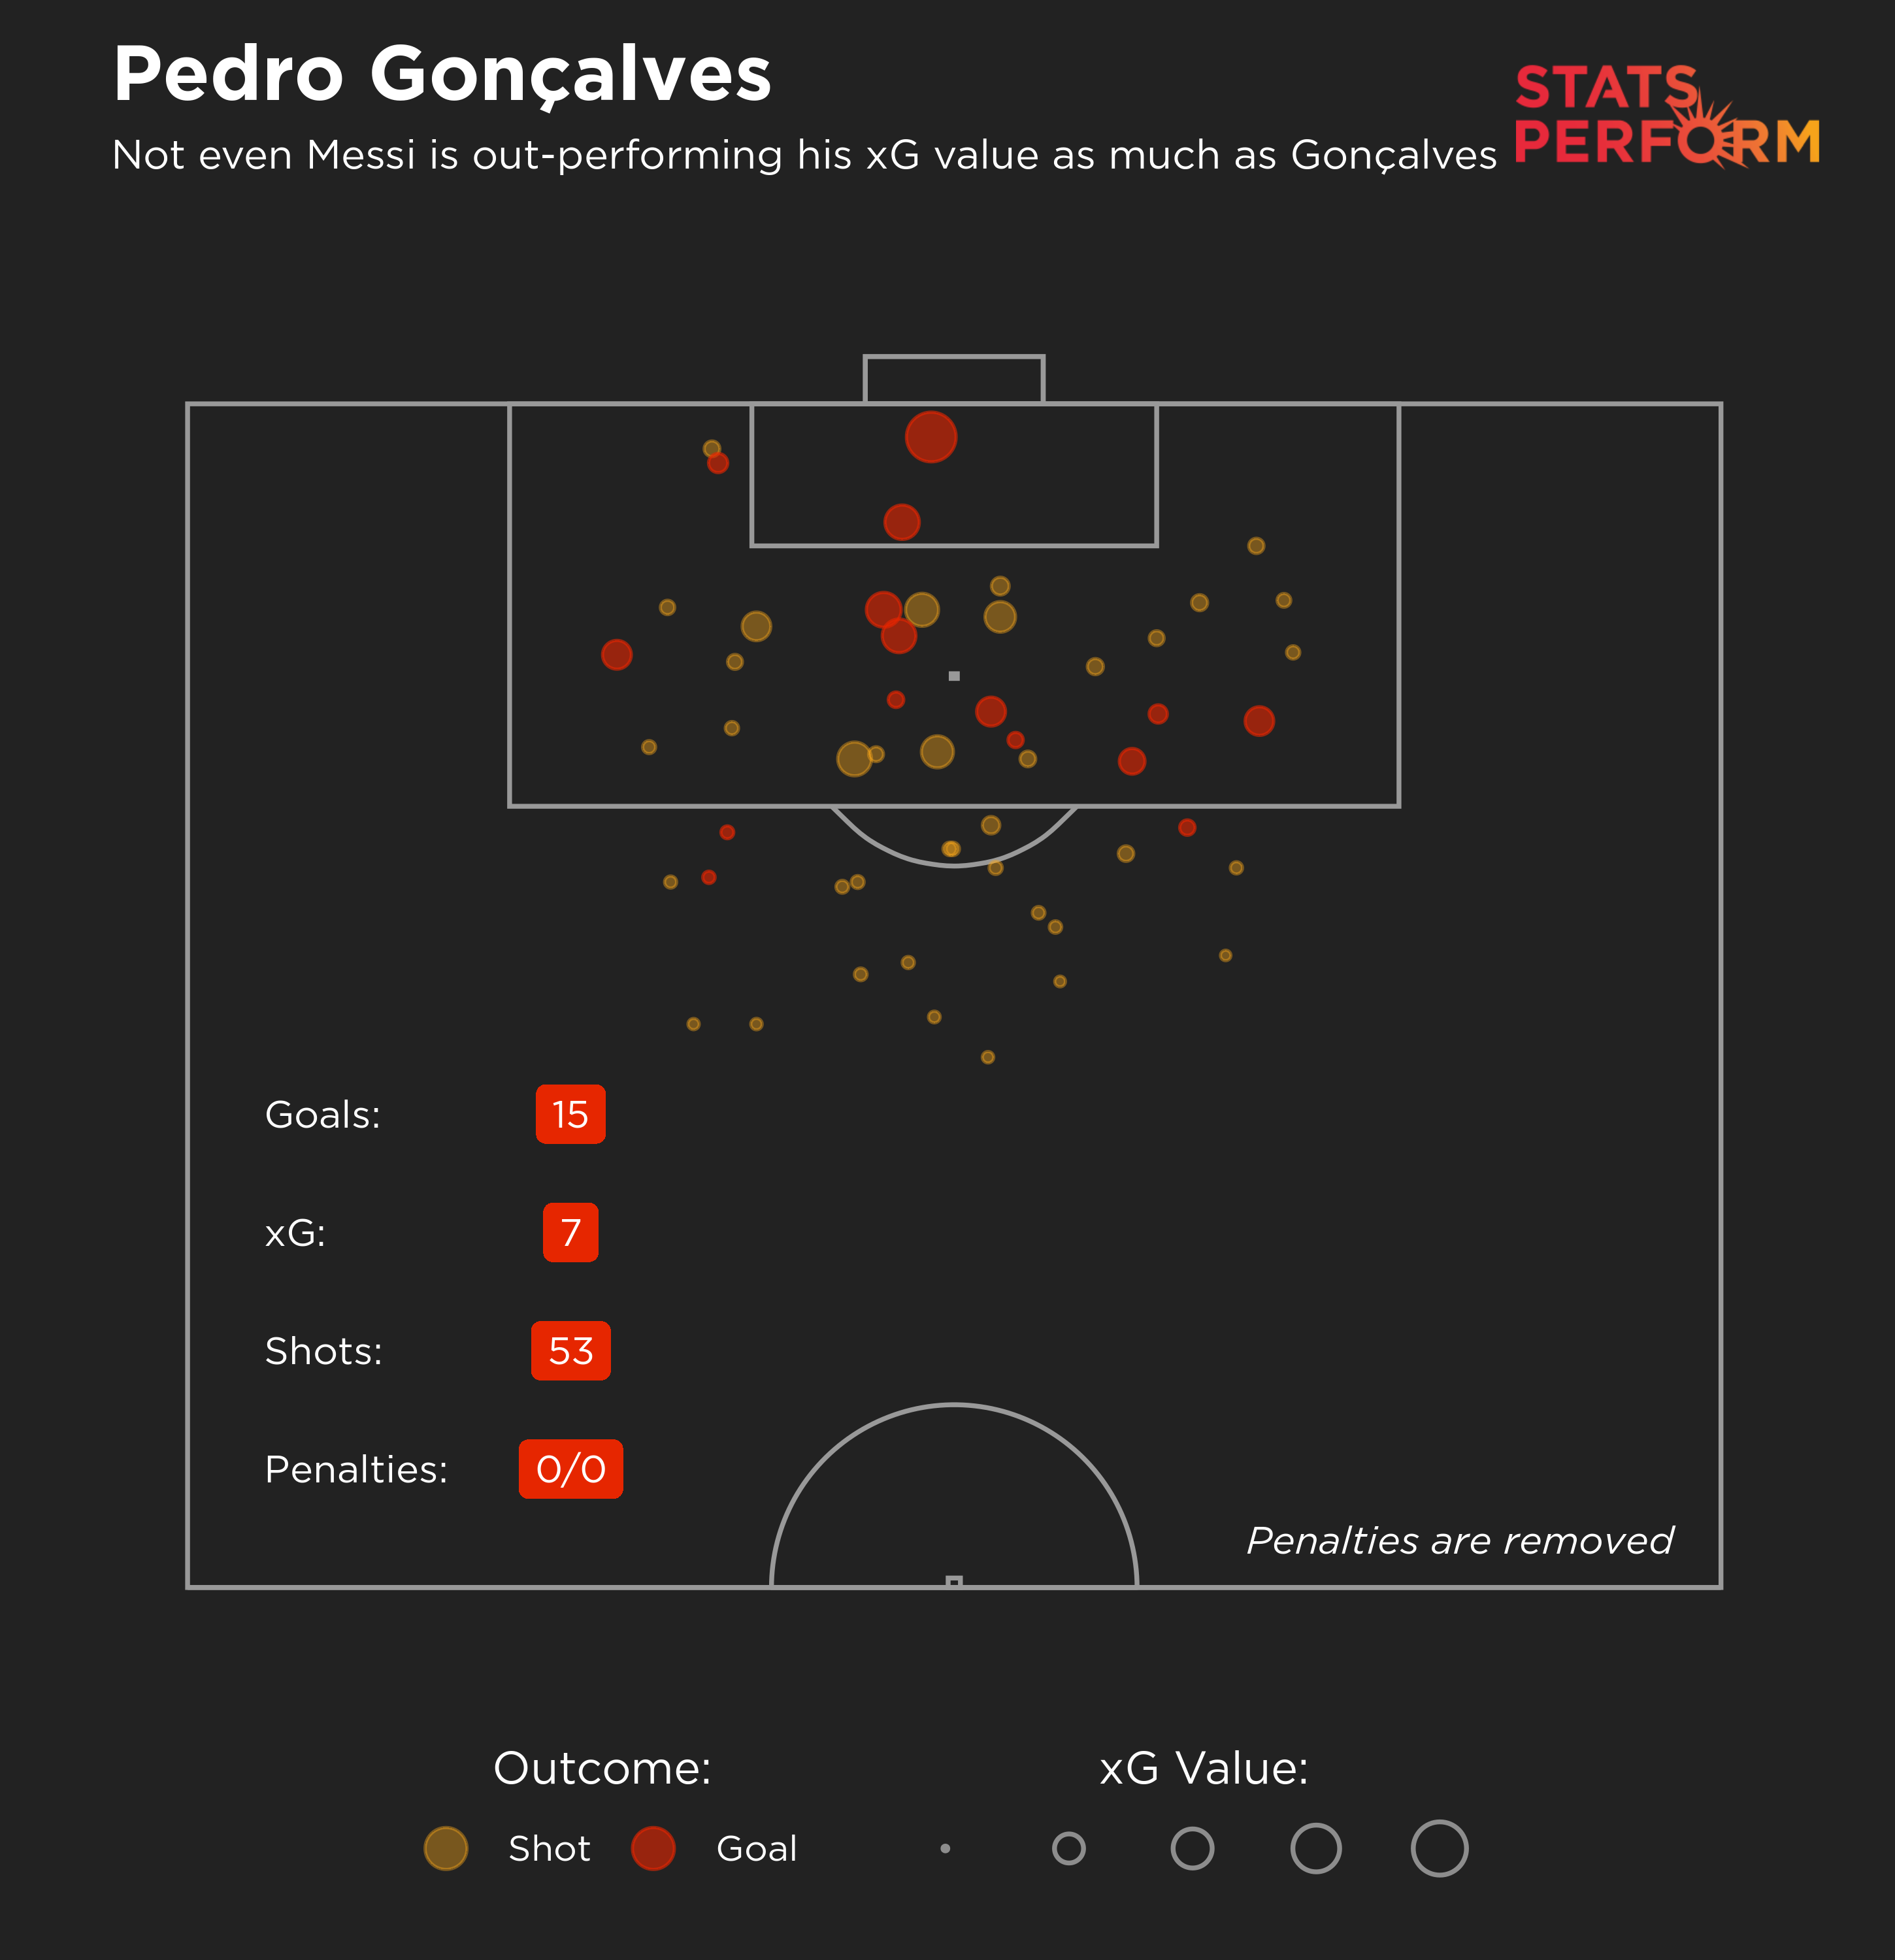 Pedro Goncalves is massively out-performing his xG value in 2020-21